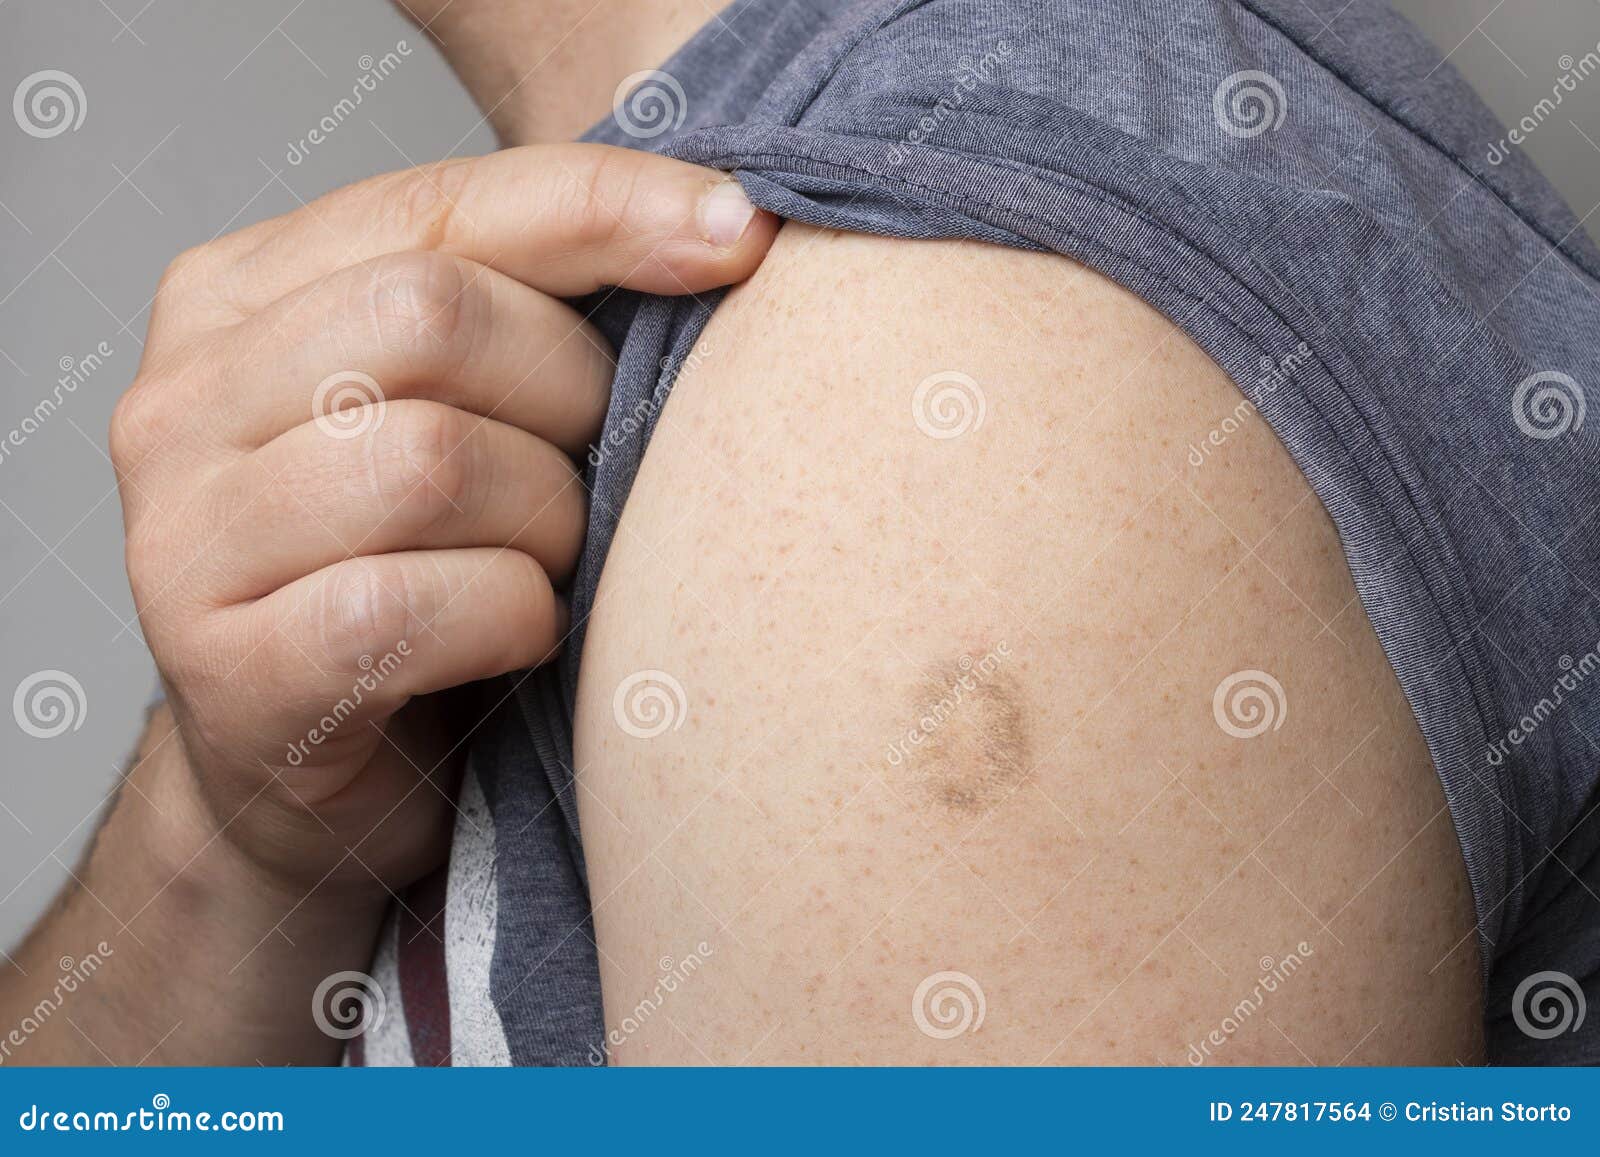 monkeypox and smallpox vaccine scar on young man`s arm